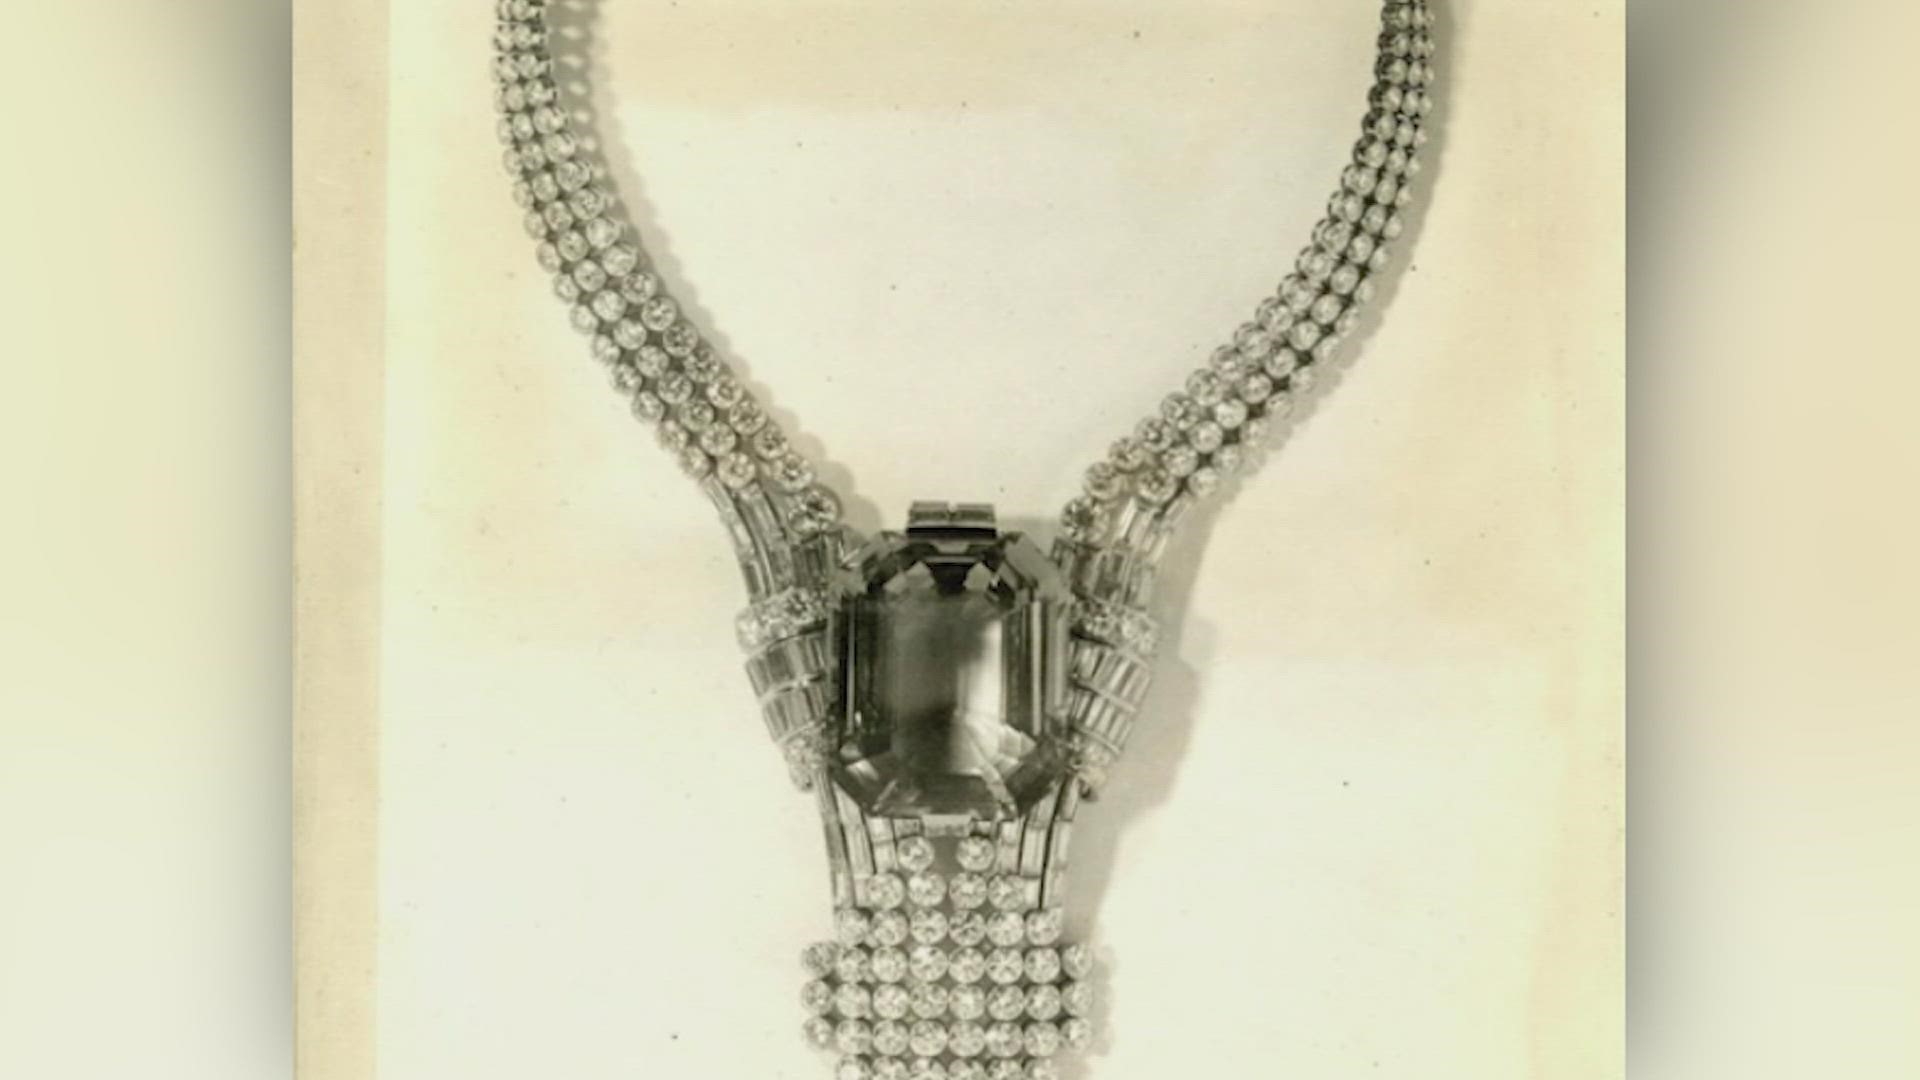 The empire diamond is eclipsed only by the 128.5-carat tiffany diamond, which is not for sale and is labeled priceless.